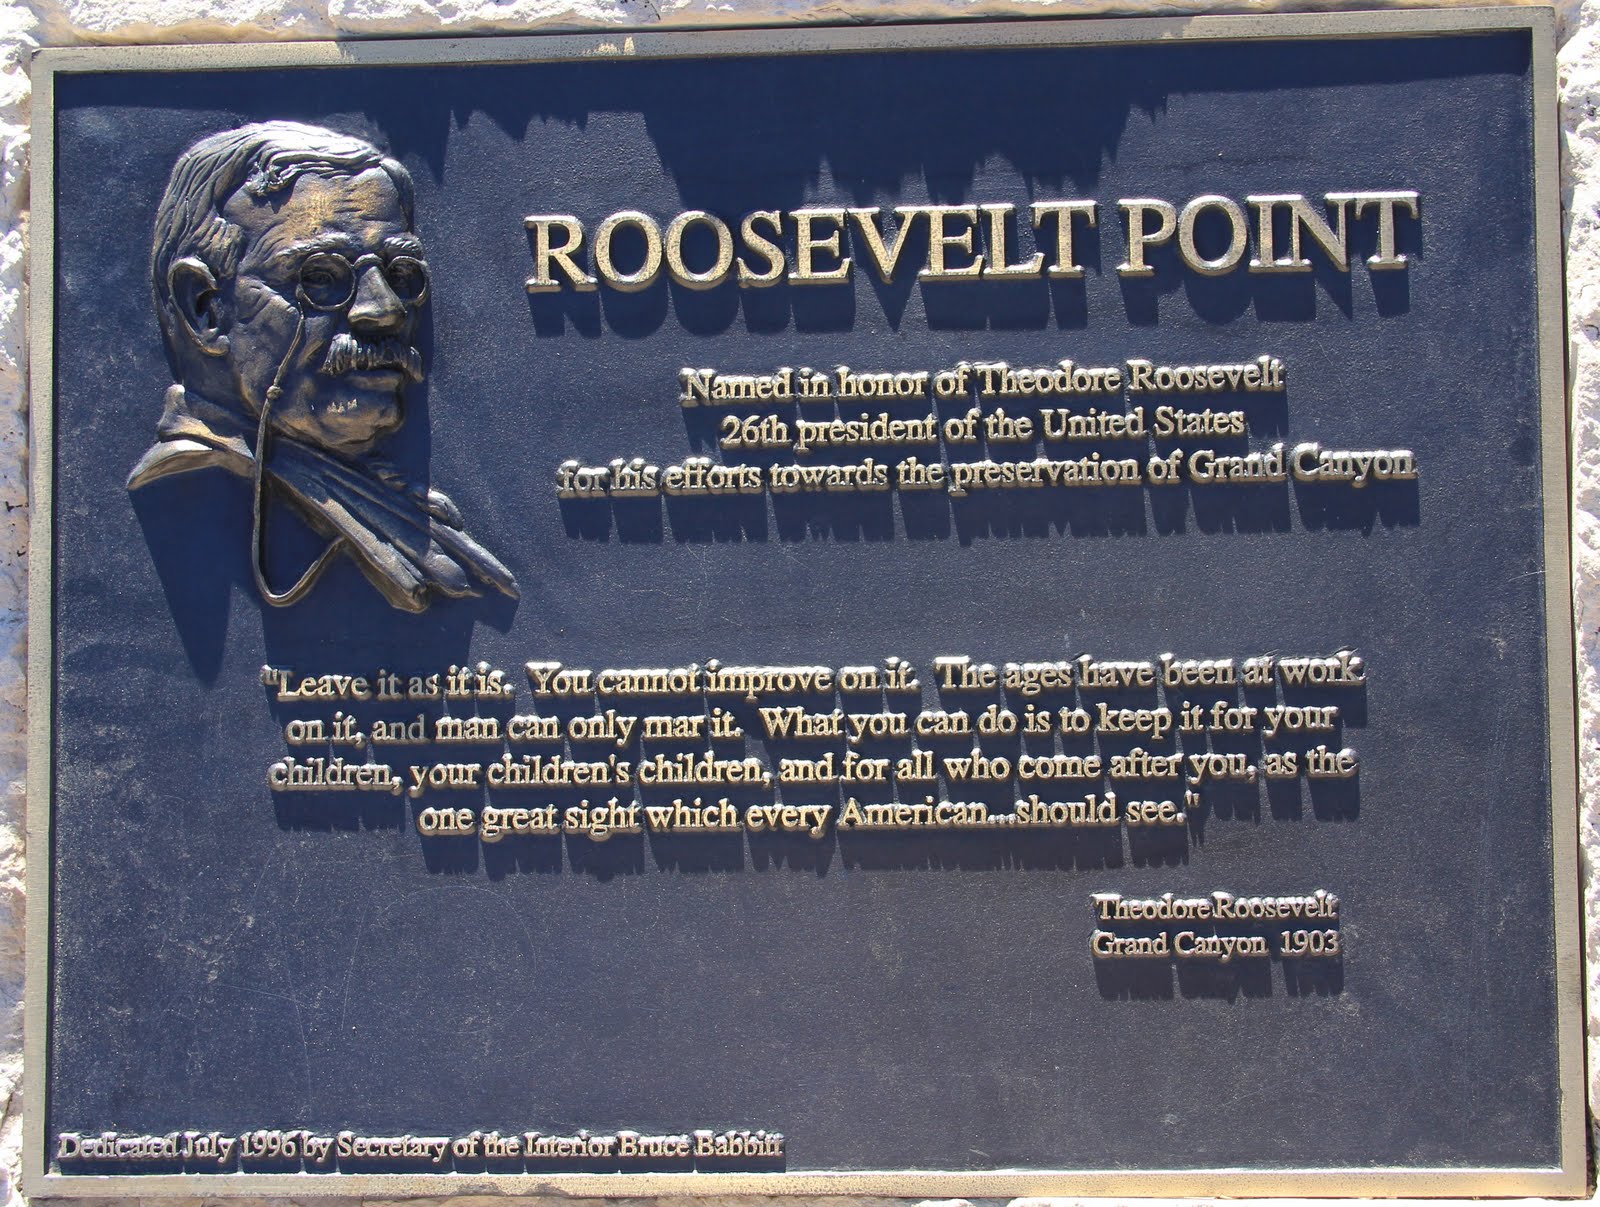 Plaque at Roosevelt Point in the Grand Canyon.